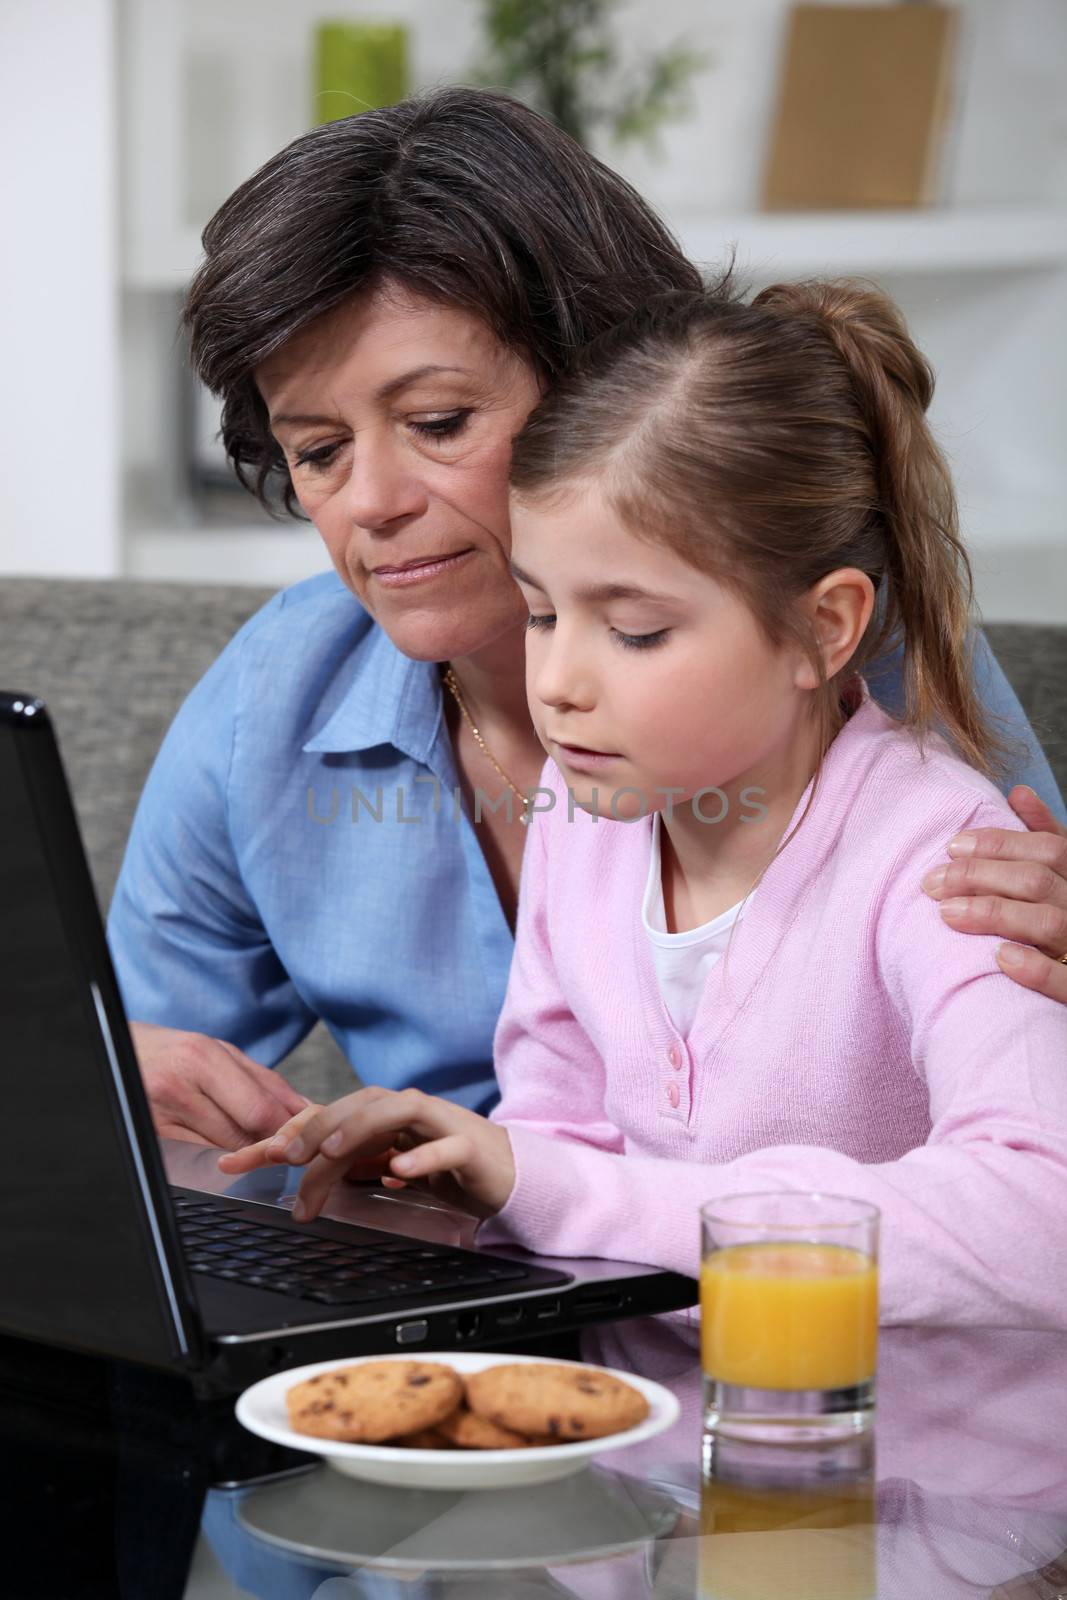 Child and her grandmother using a laptop by phovoir